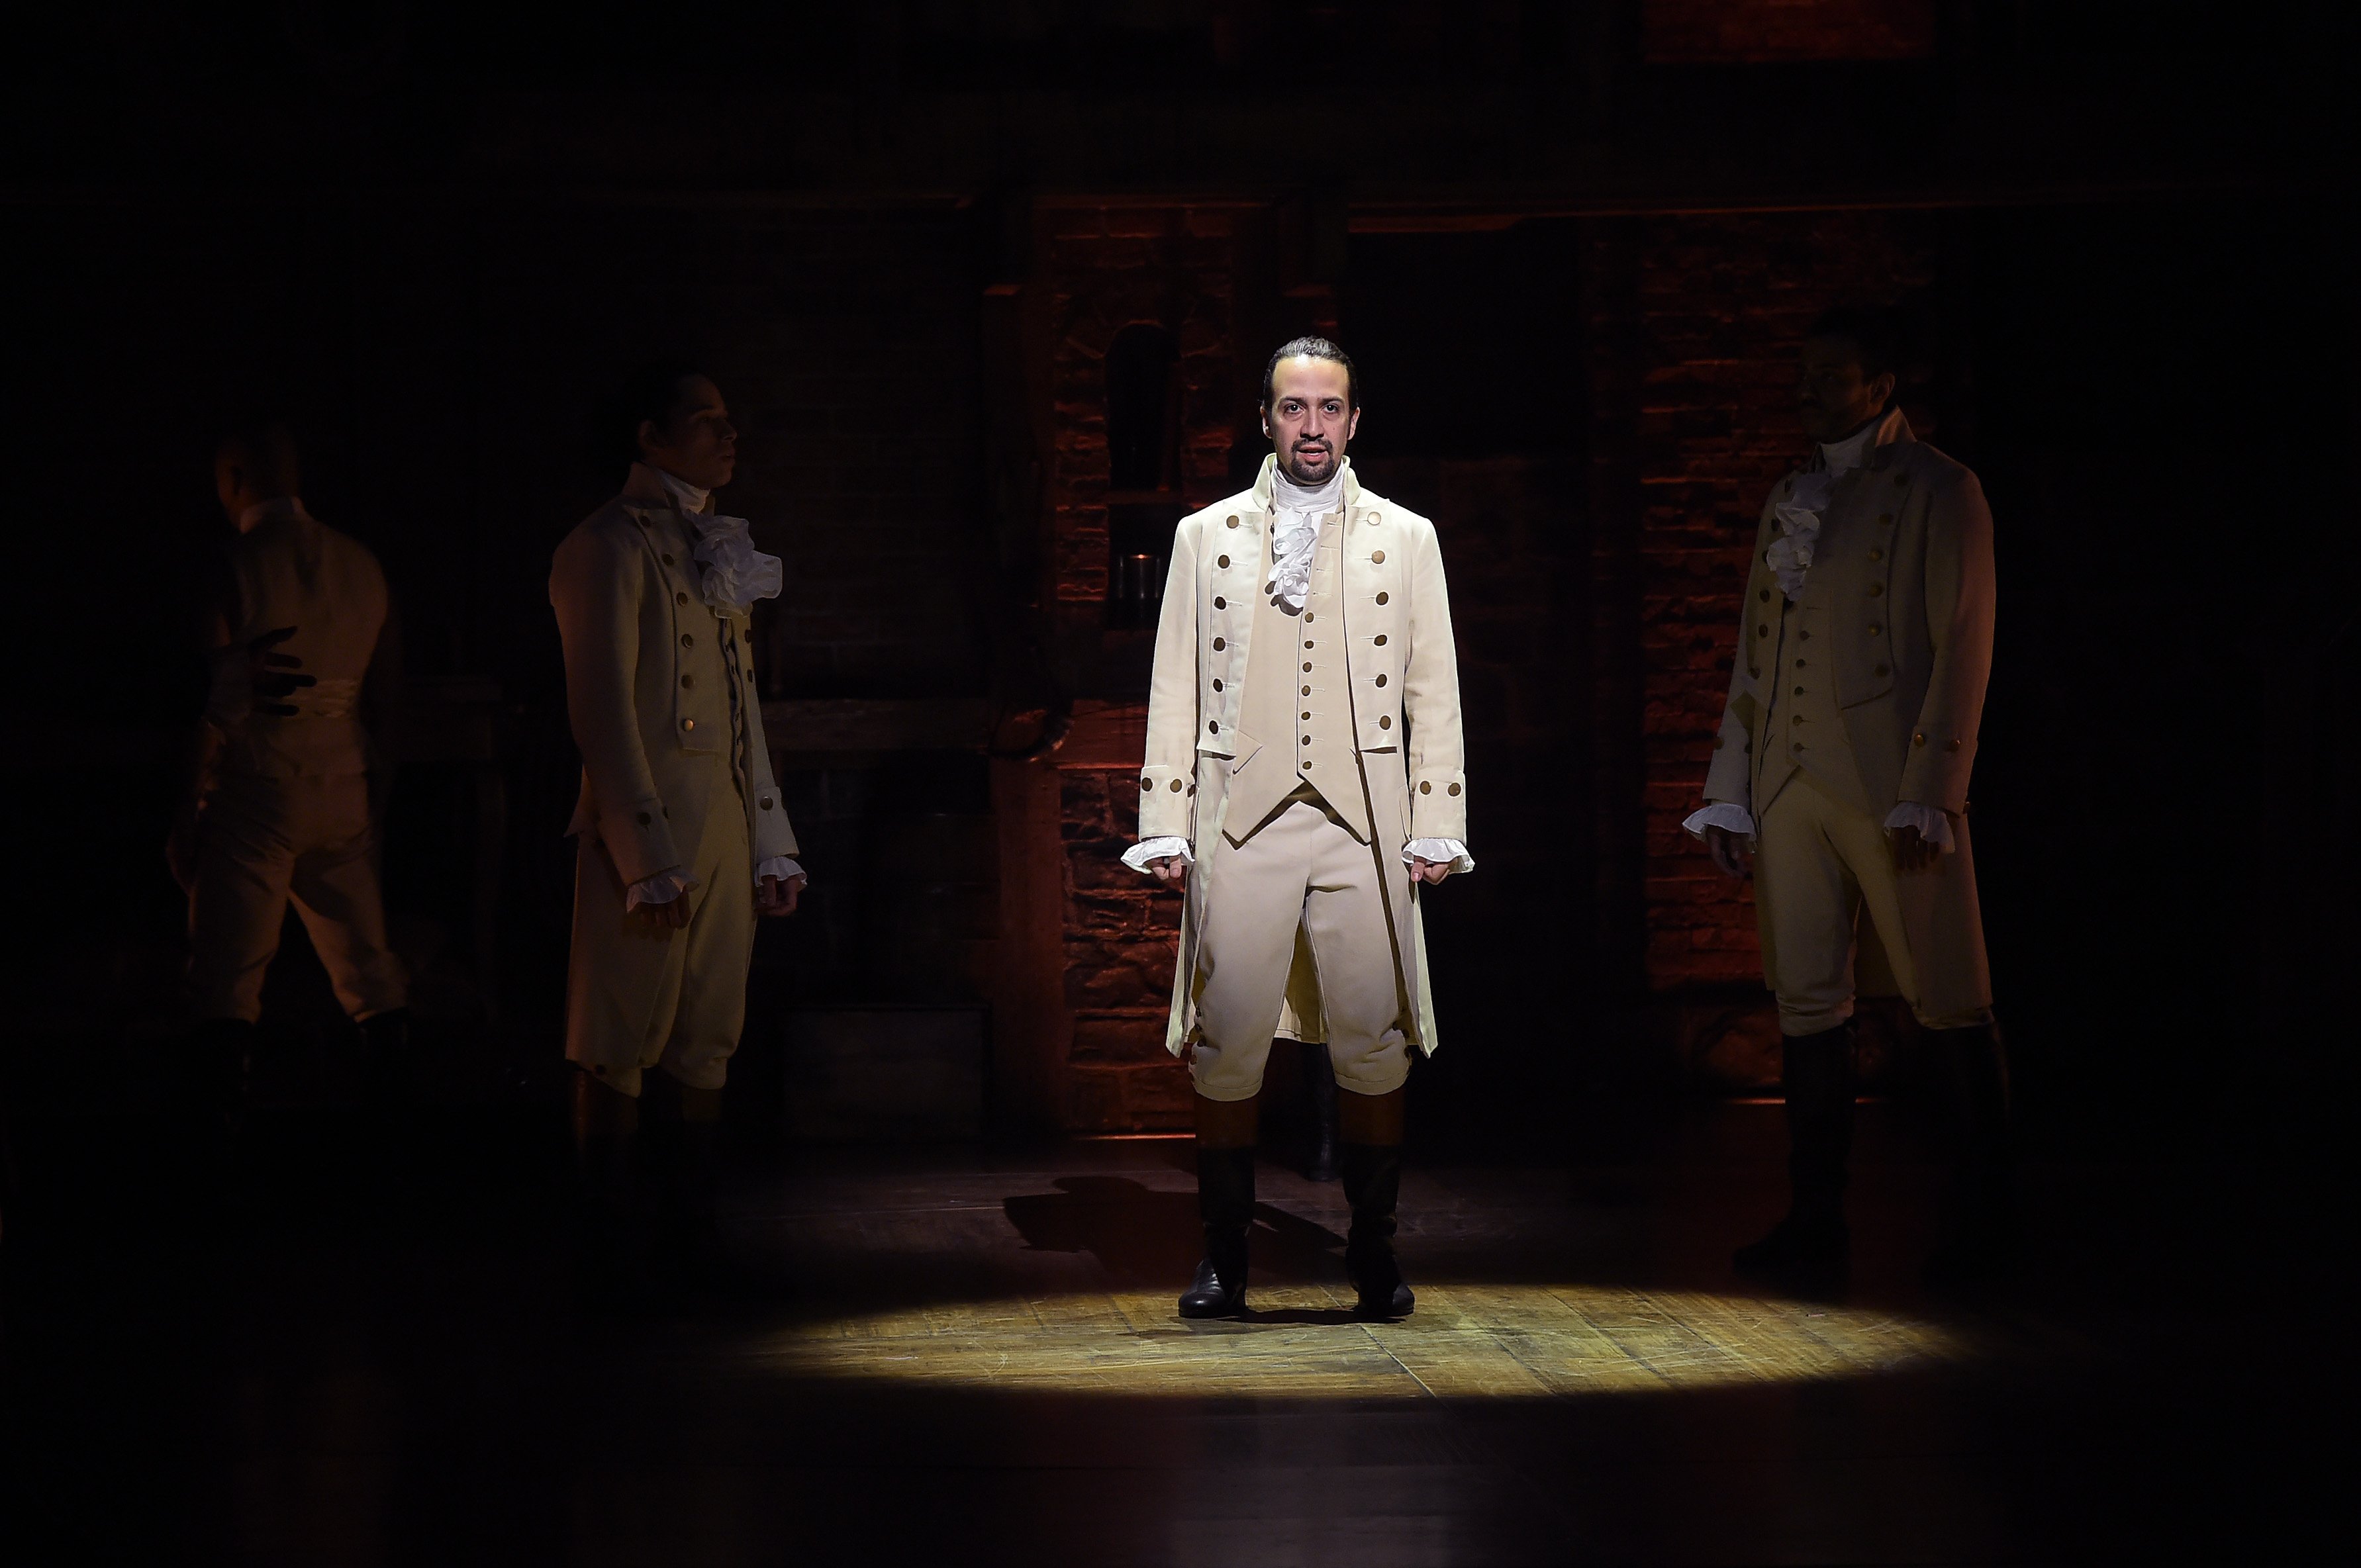 Lin Manuel Miranda under the spotlight in his musical Hamilton streaming on Disney+ and is a nominee for the Emmys 2021